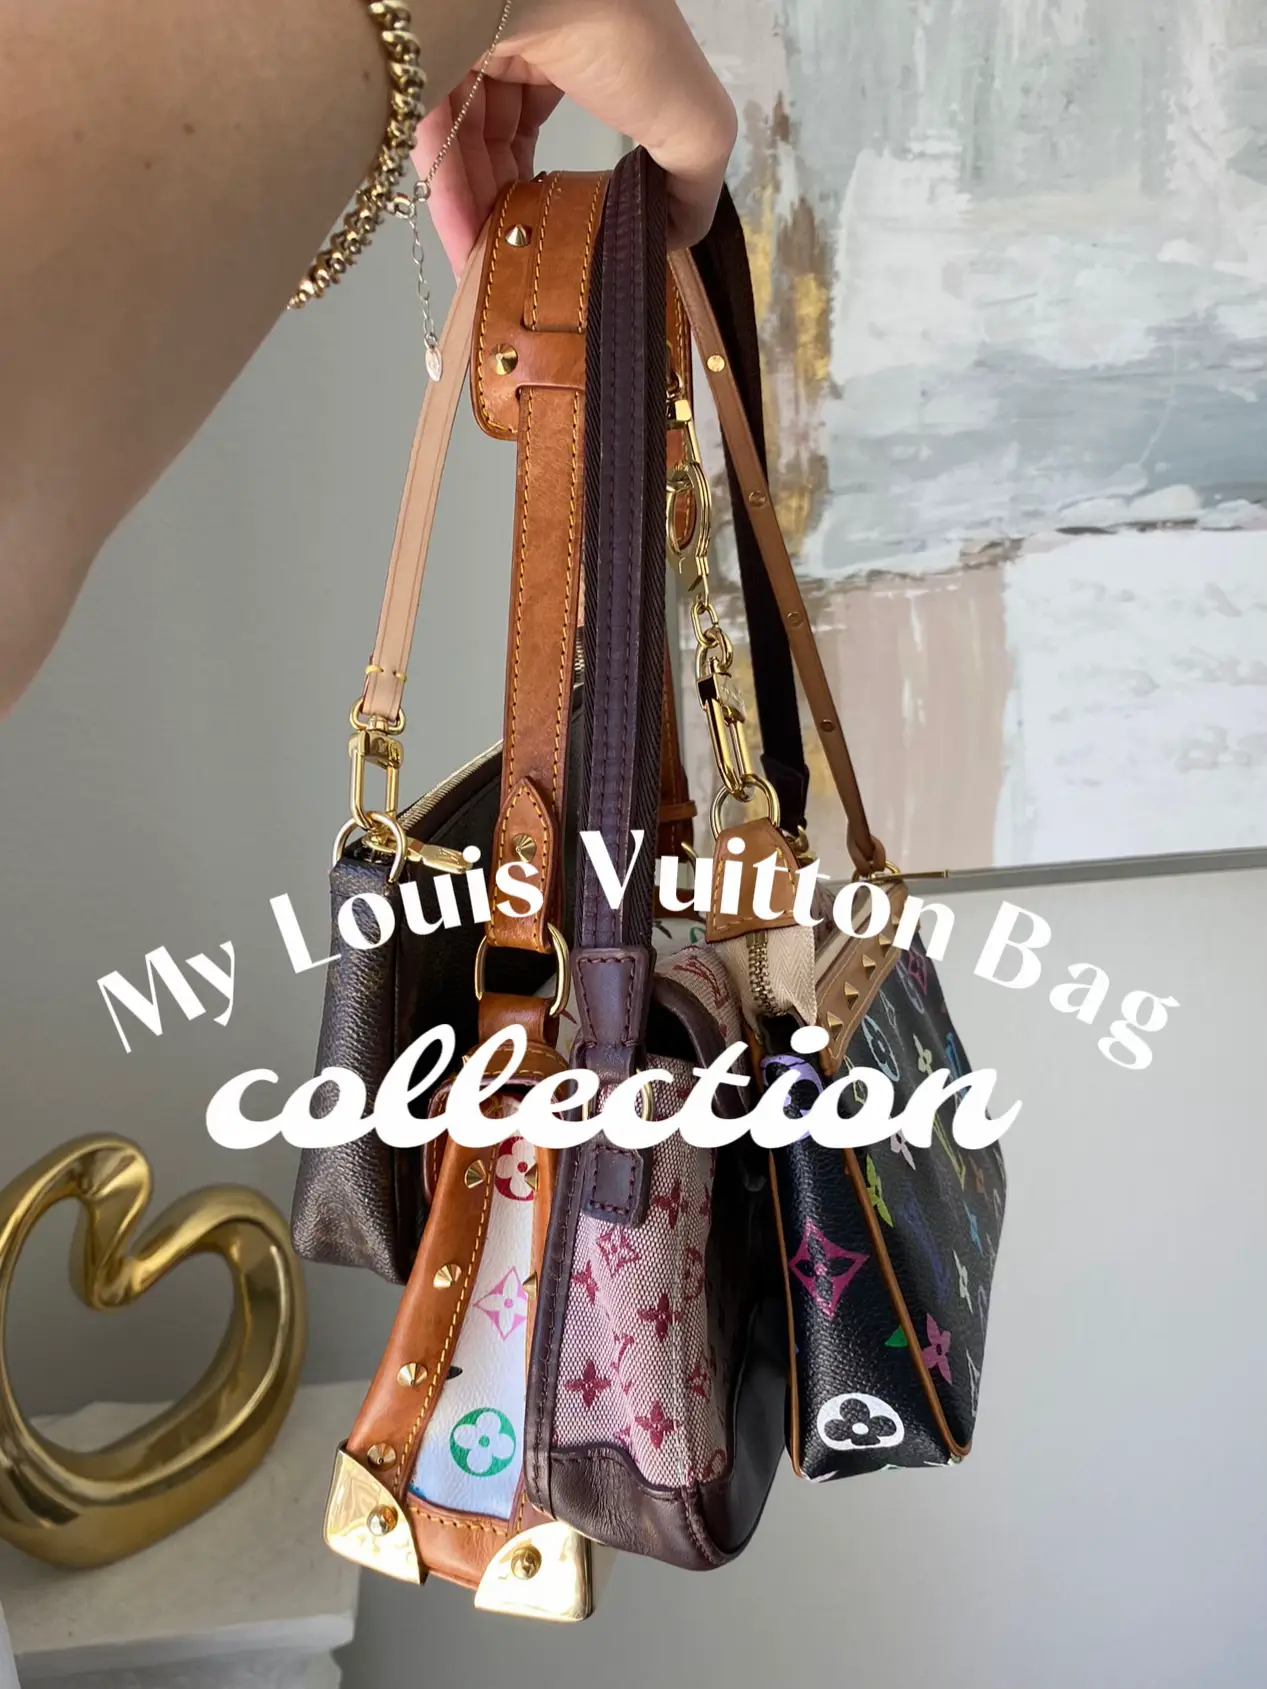 My Louis Vuitton Bag Collection  Gallery posted by Caitlin Eliza